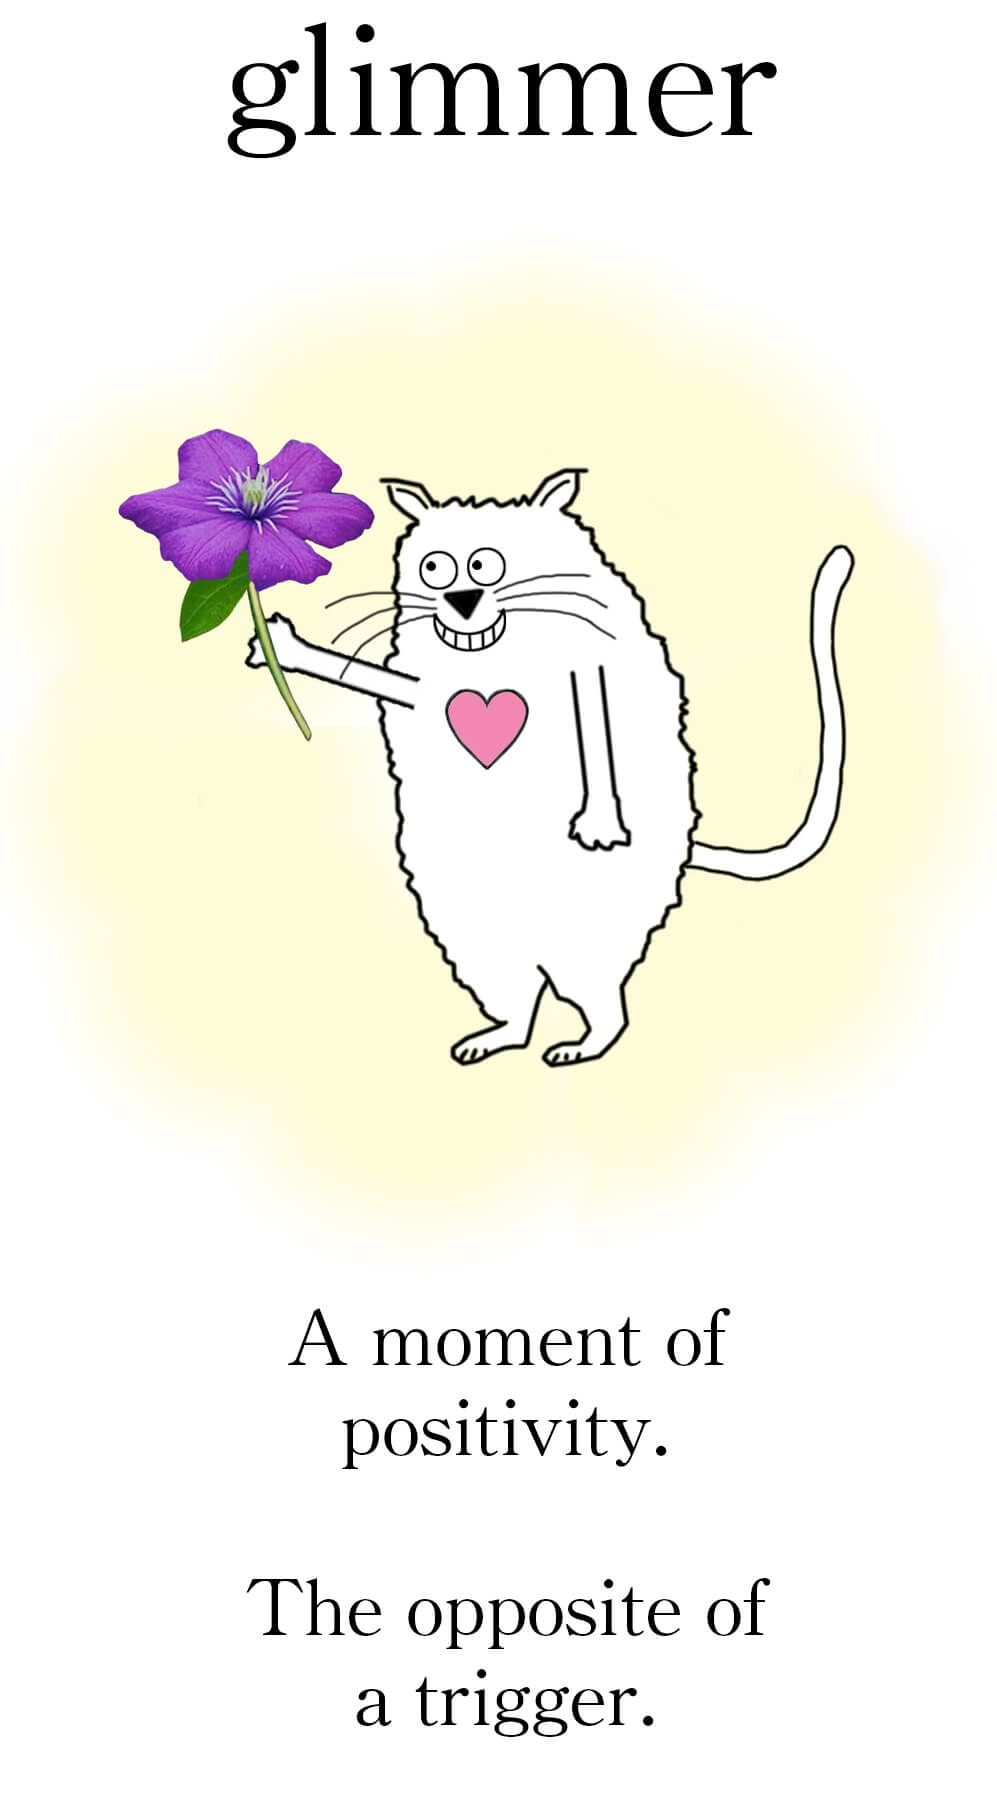 A cartoon cat admiring a beautiful flower, showing that a glimmer is a moment of positivity